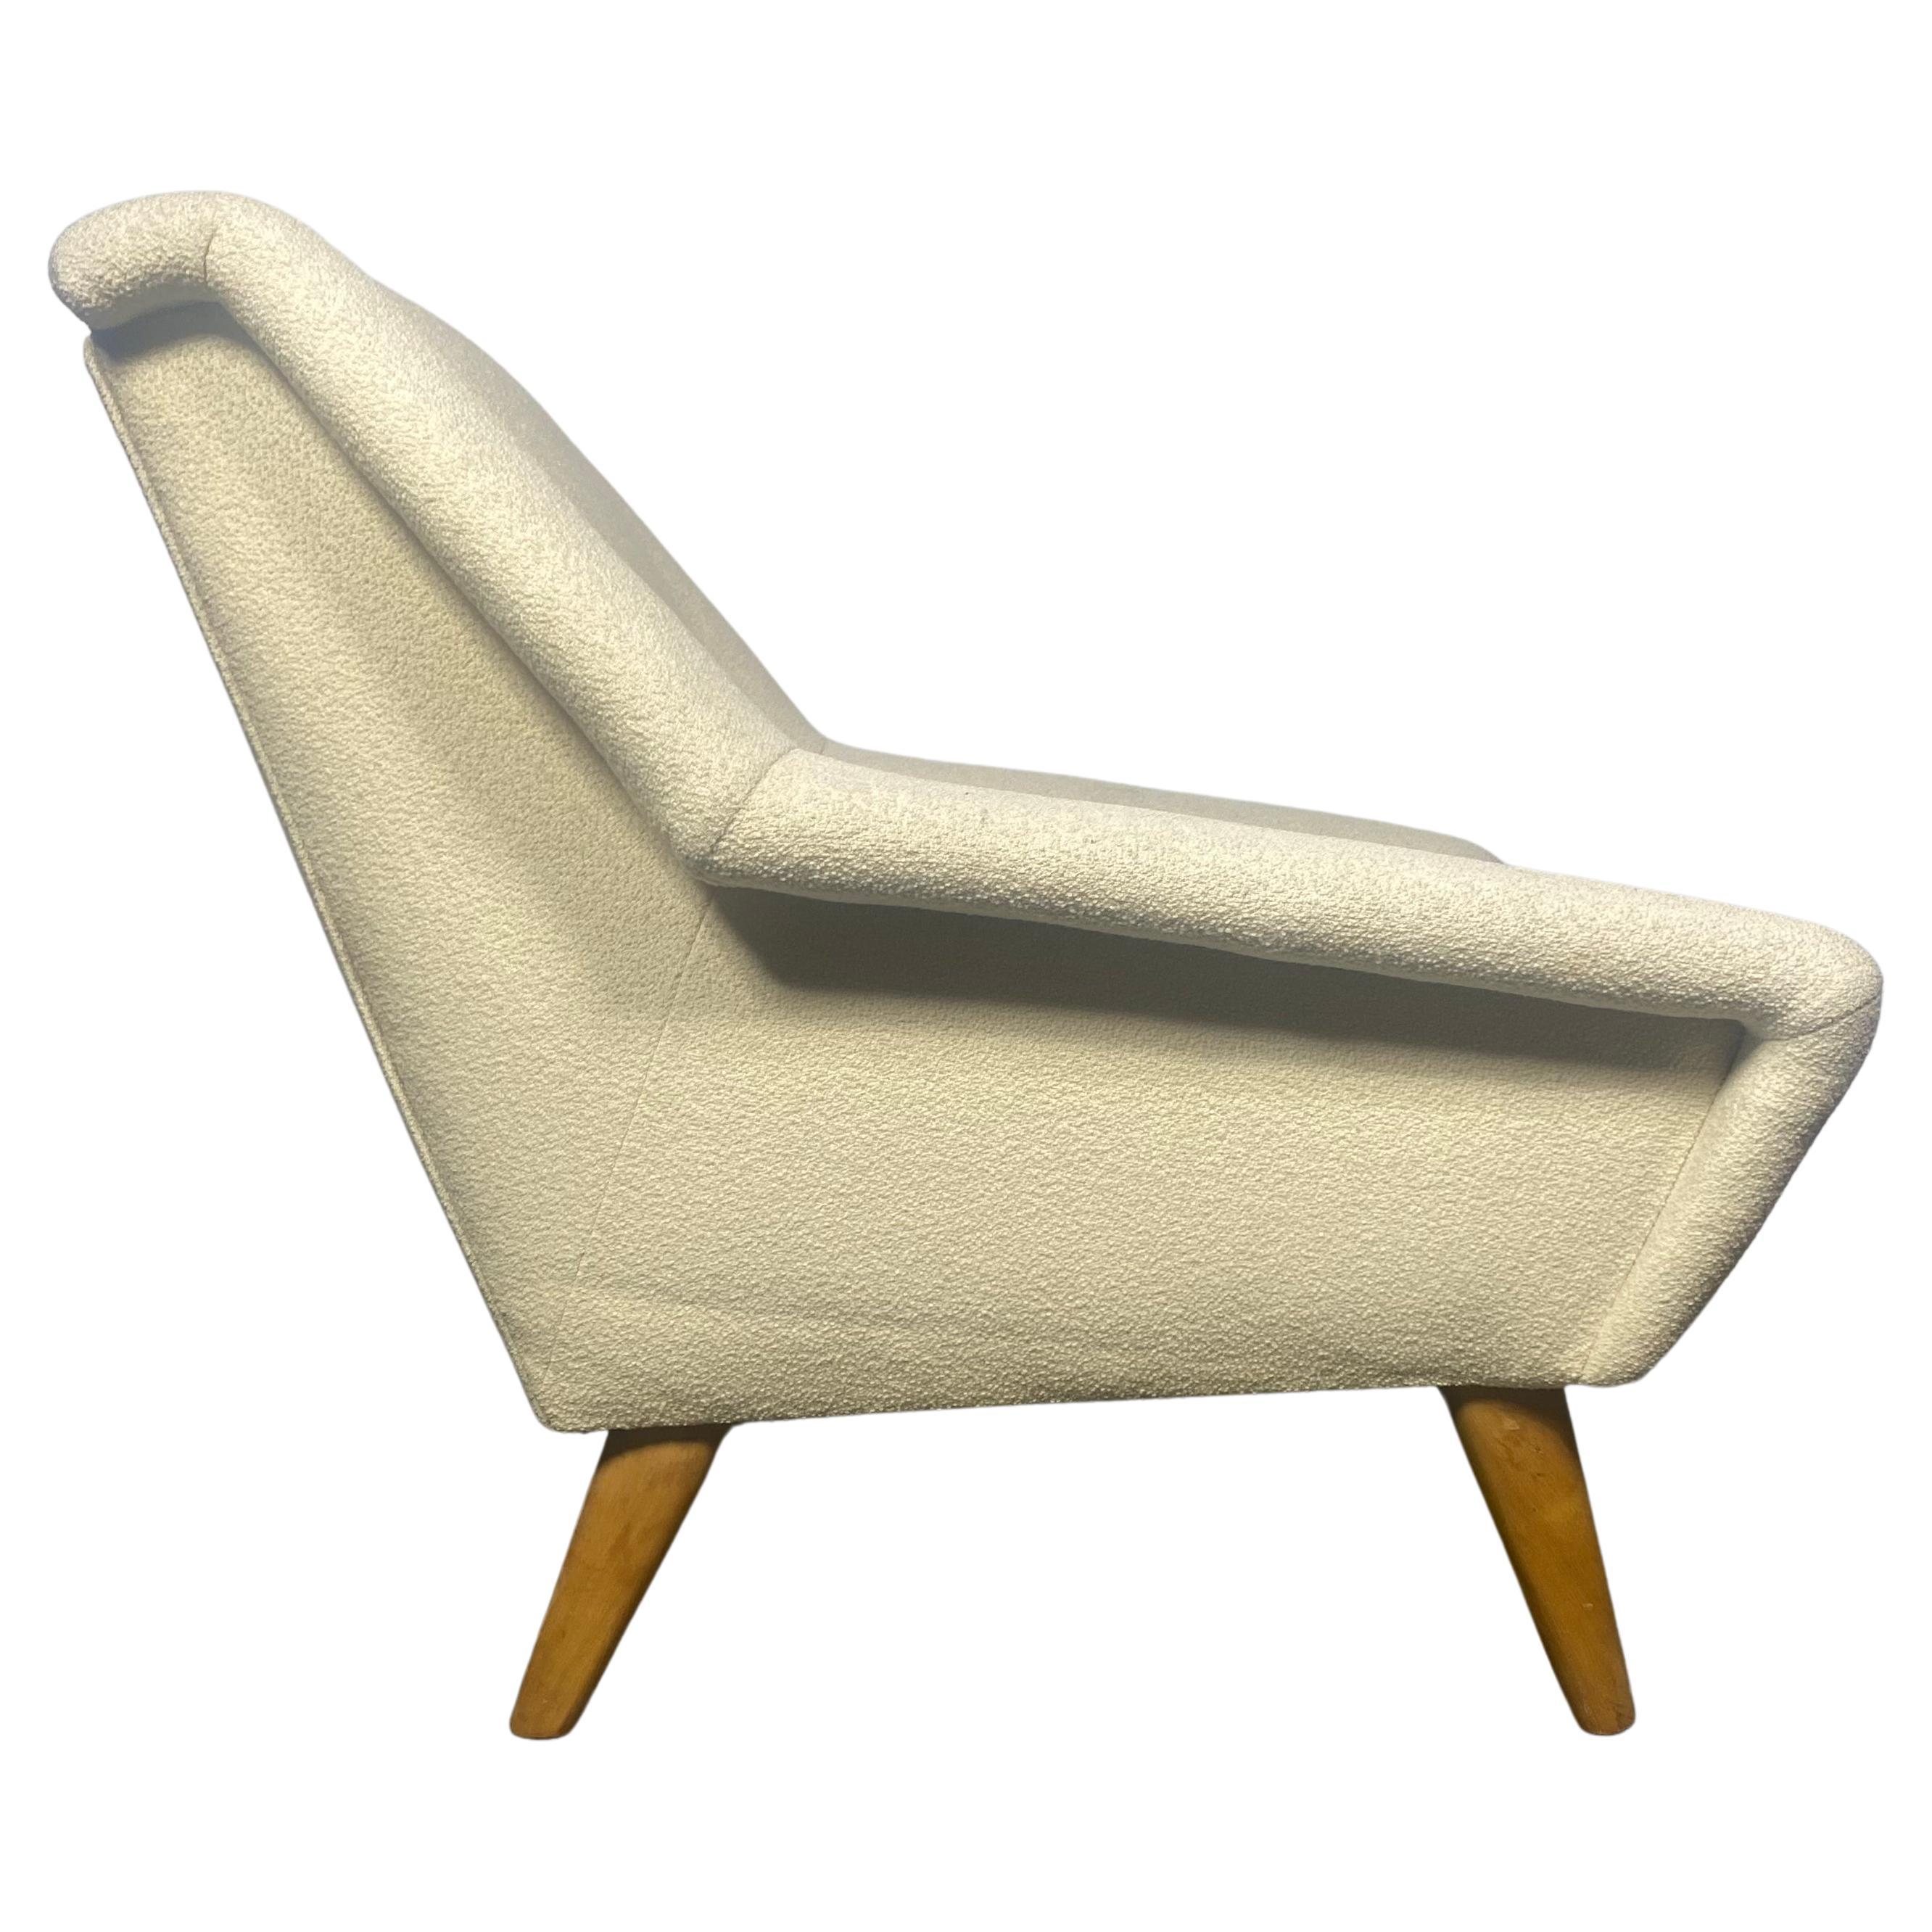 Classic Modernist Lounge Chair by Heywood Wakefield , after Gio Ponti